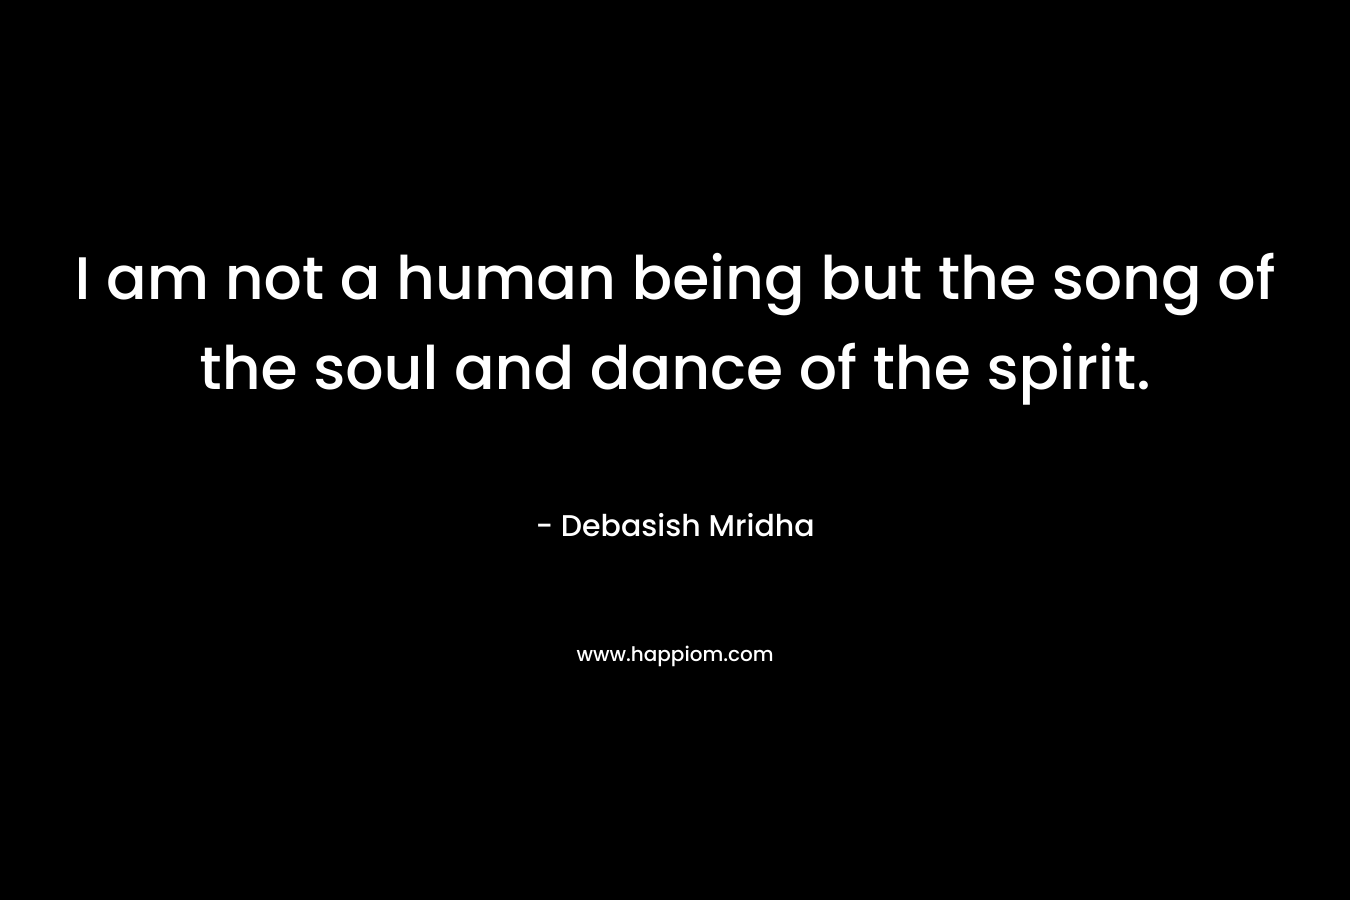 I am not a human being but the song of the soul and dance of the spirit.